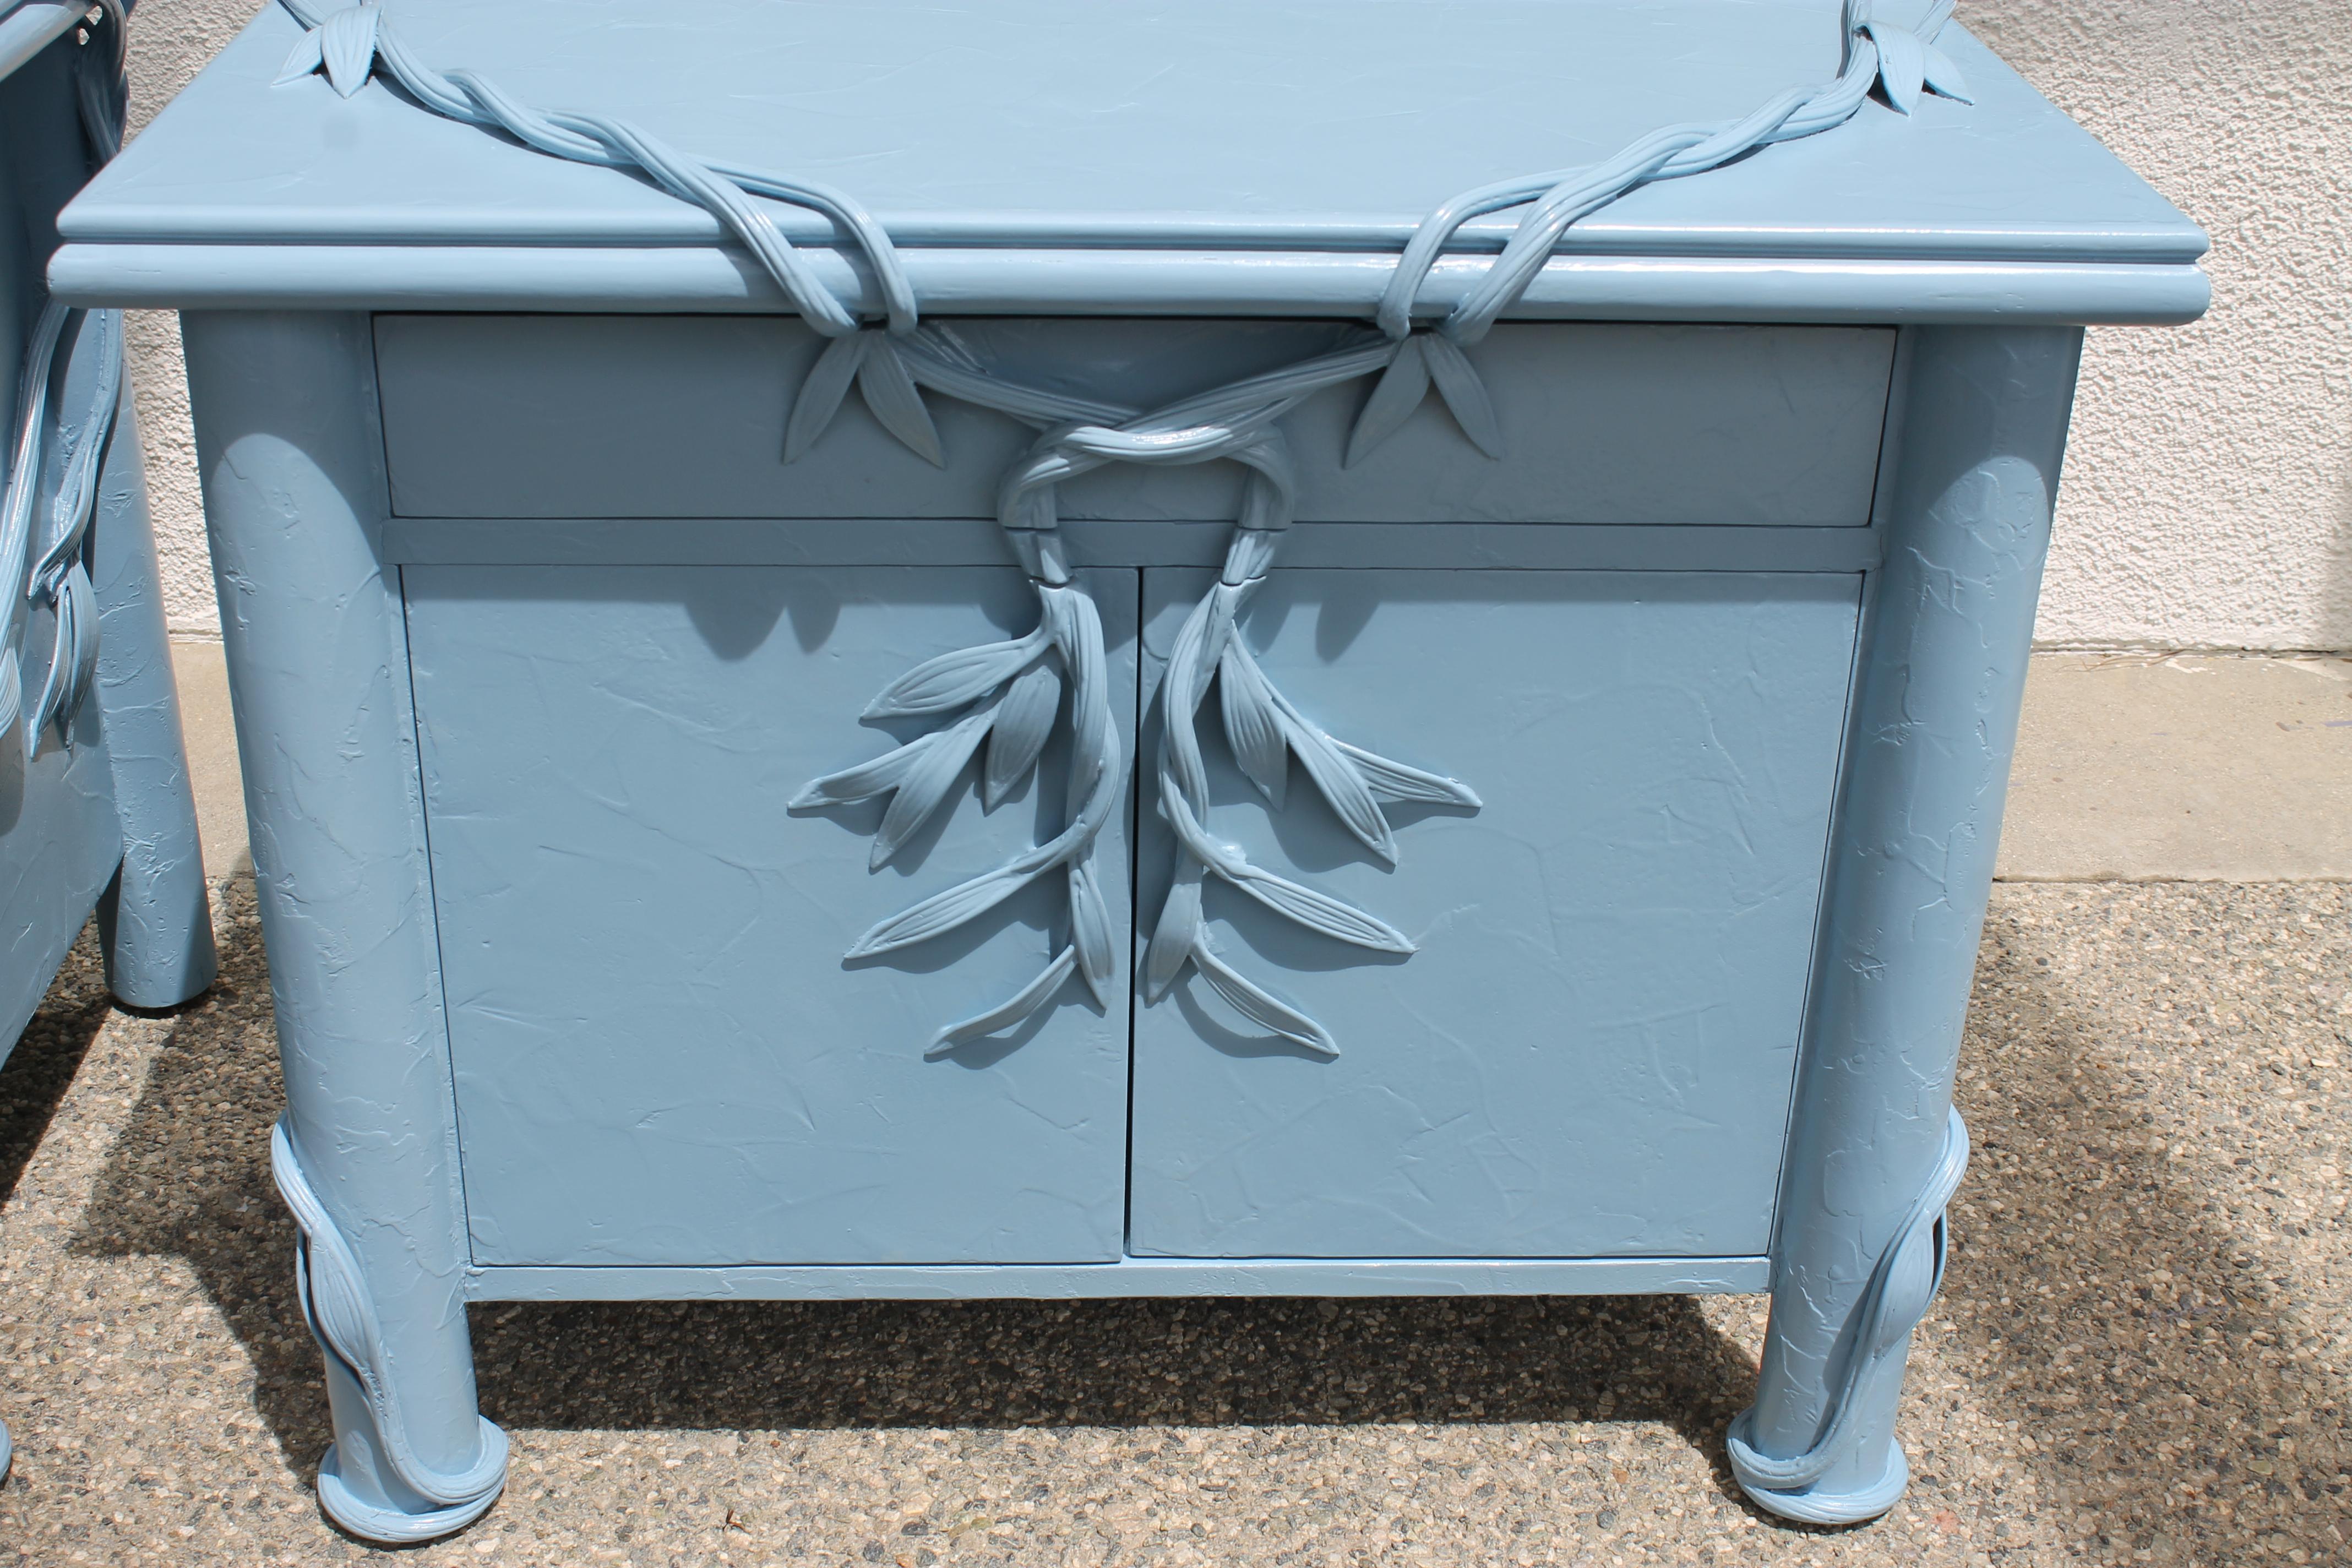 Pair of nightstands designed by Betty Cobonpue for Scultura, Philippines, 1980s. We've updated these nightstands by painting them a rich light blue. Nightstands measure: 30.5” wide, 21” deep and 24.5” high. Notice the wavy pattern throughout the